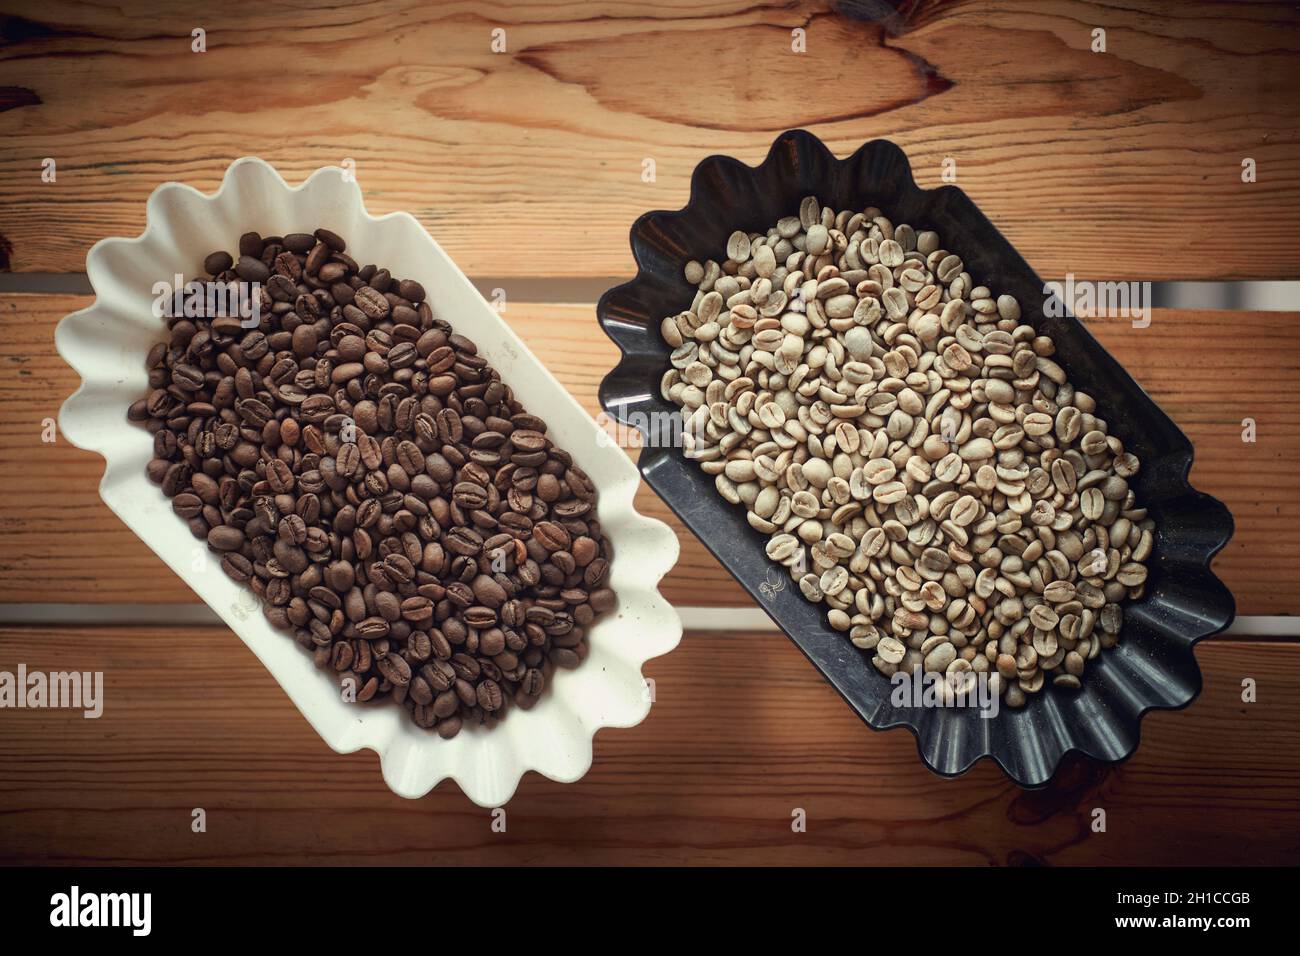 Fragrant and aromatic raw and roasted coffee beans in containers on the table. Coffee, beverage, producing Stock Photo